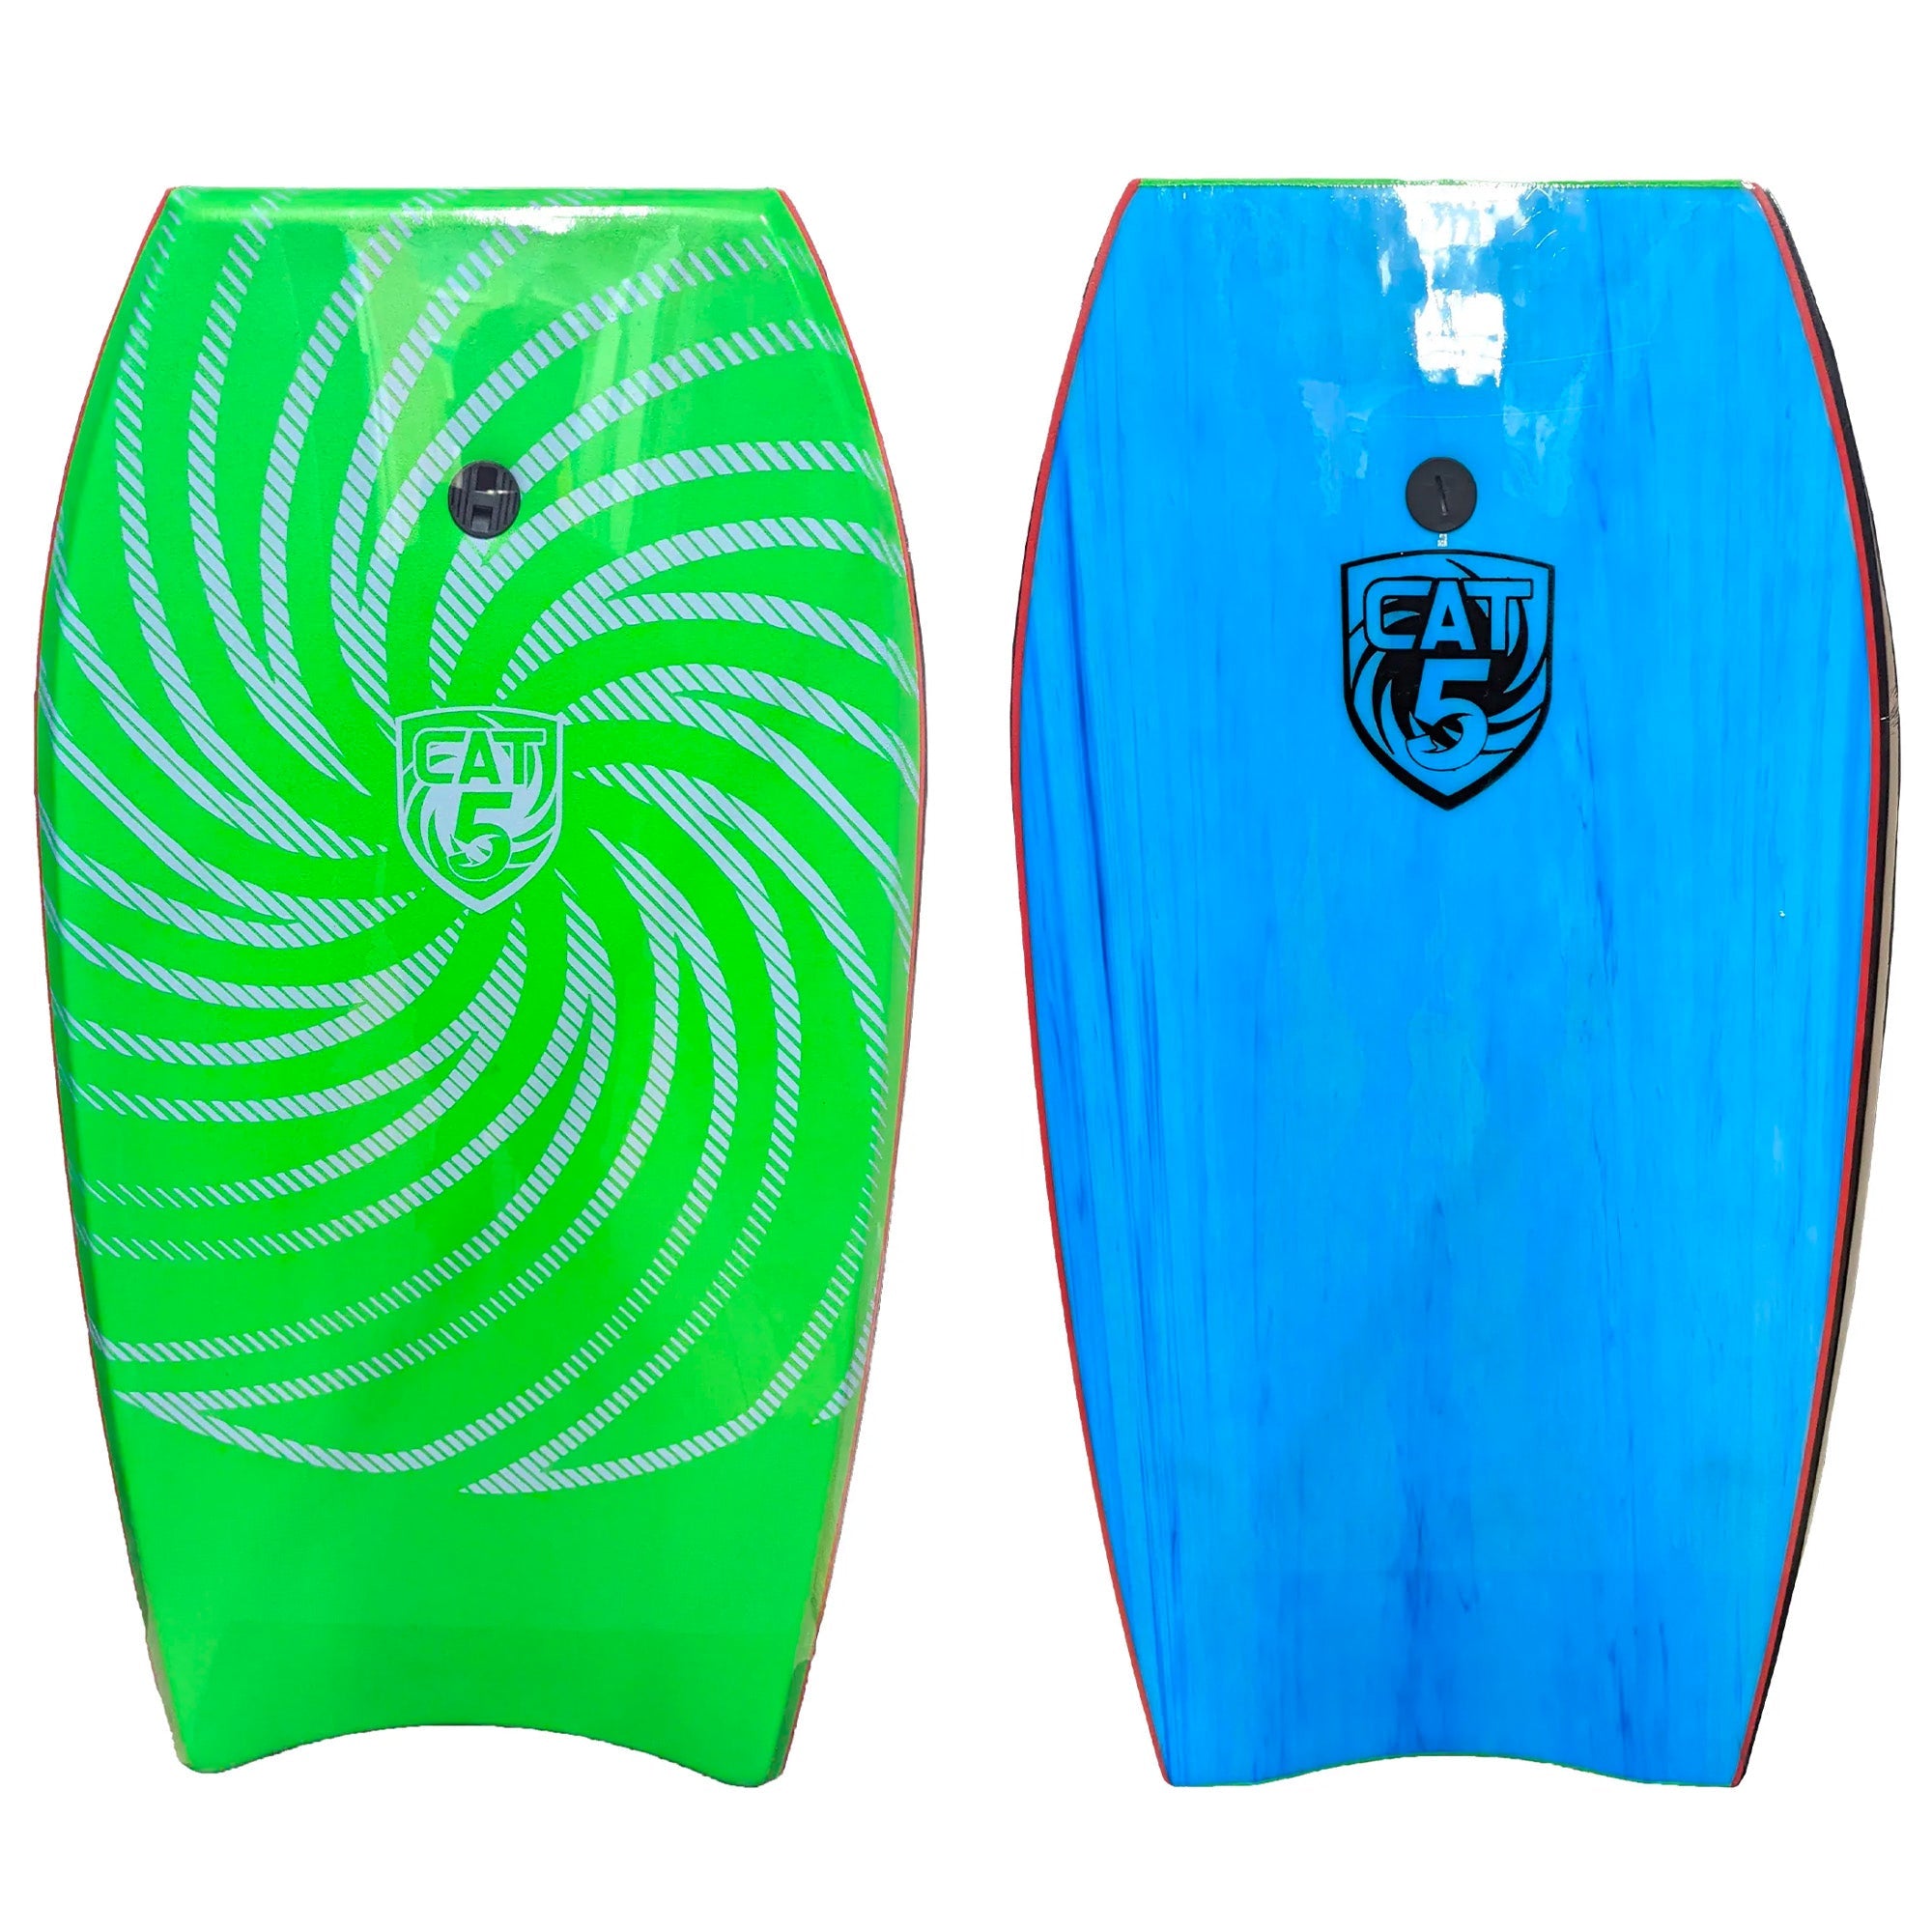 Cat 5 The Charger 42" Bodyboard